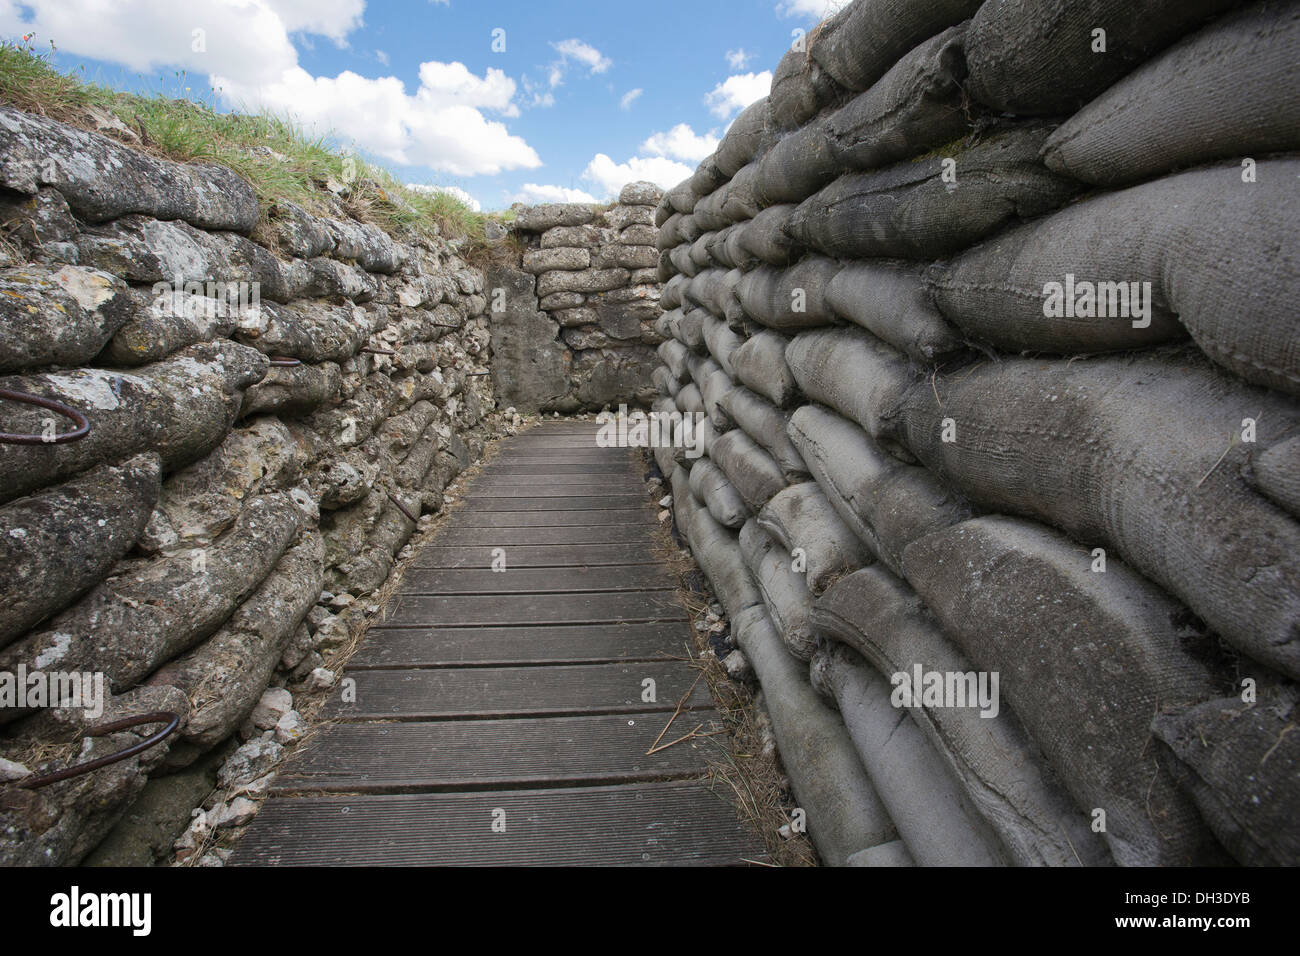 Walking head down through the trenches of death Stock Photo